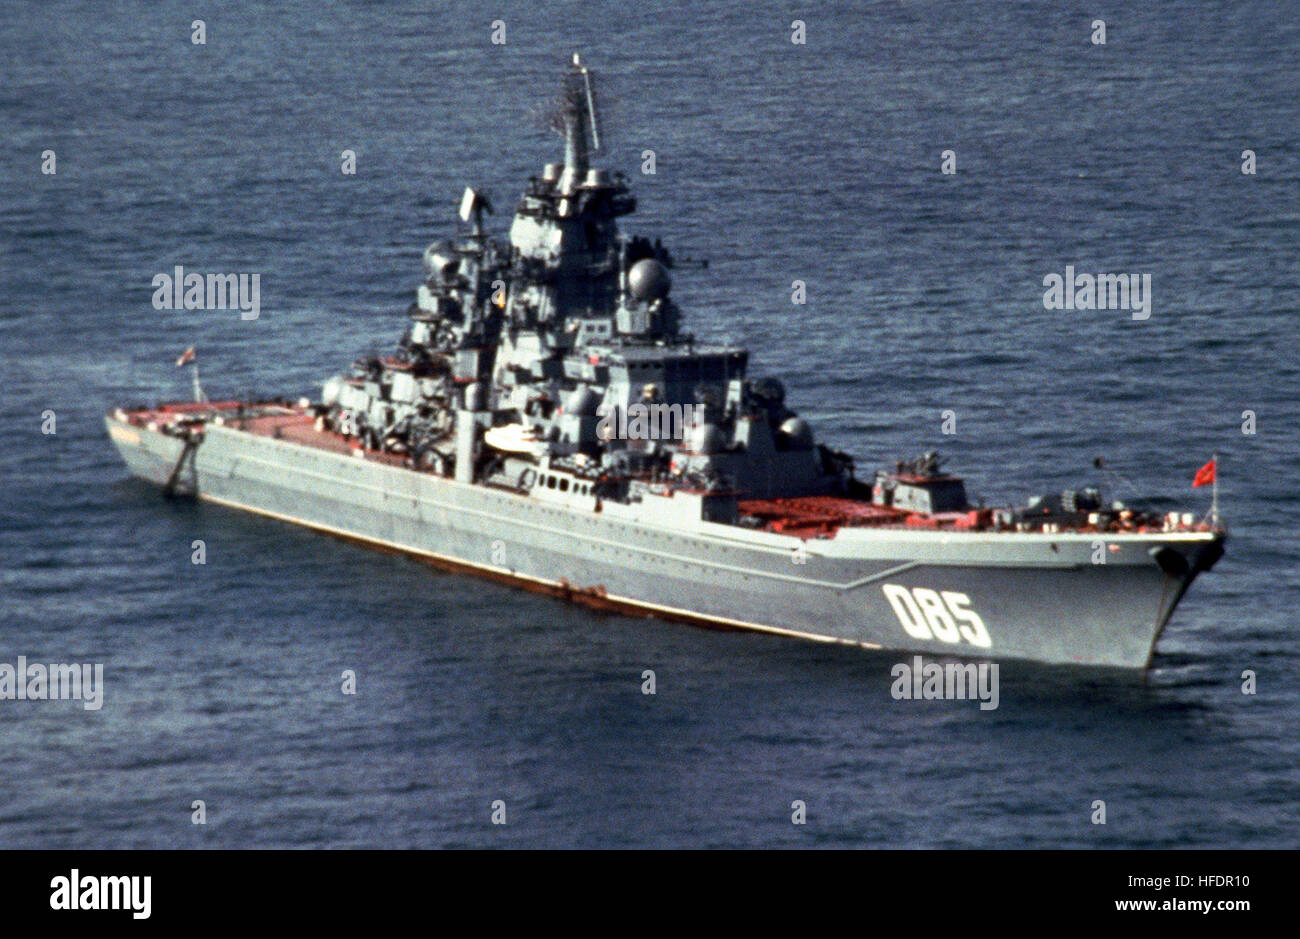 A starboard bow view of the Soviet Kirov class nuclear-powered guided missile cruiser KALININ